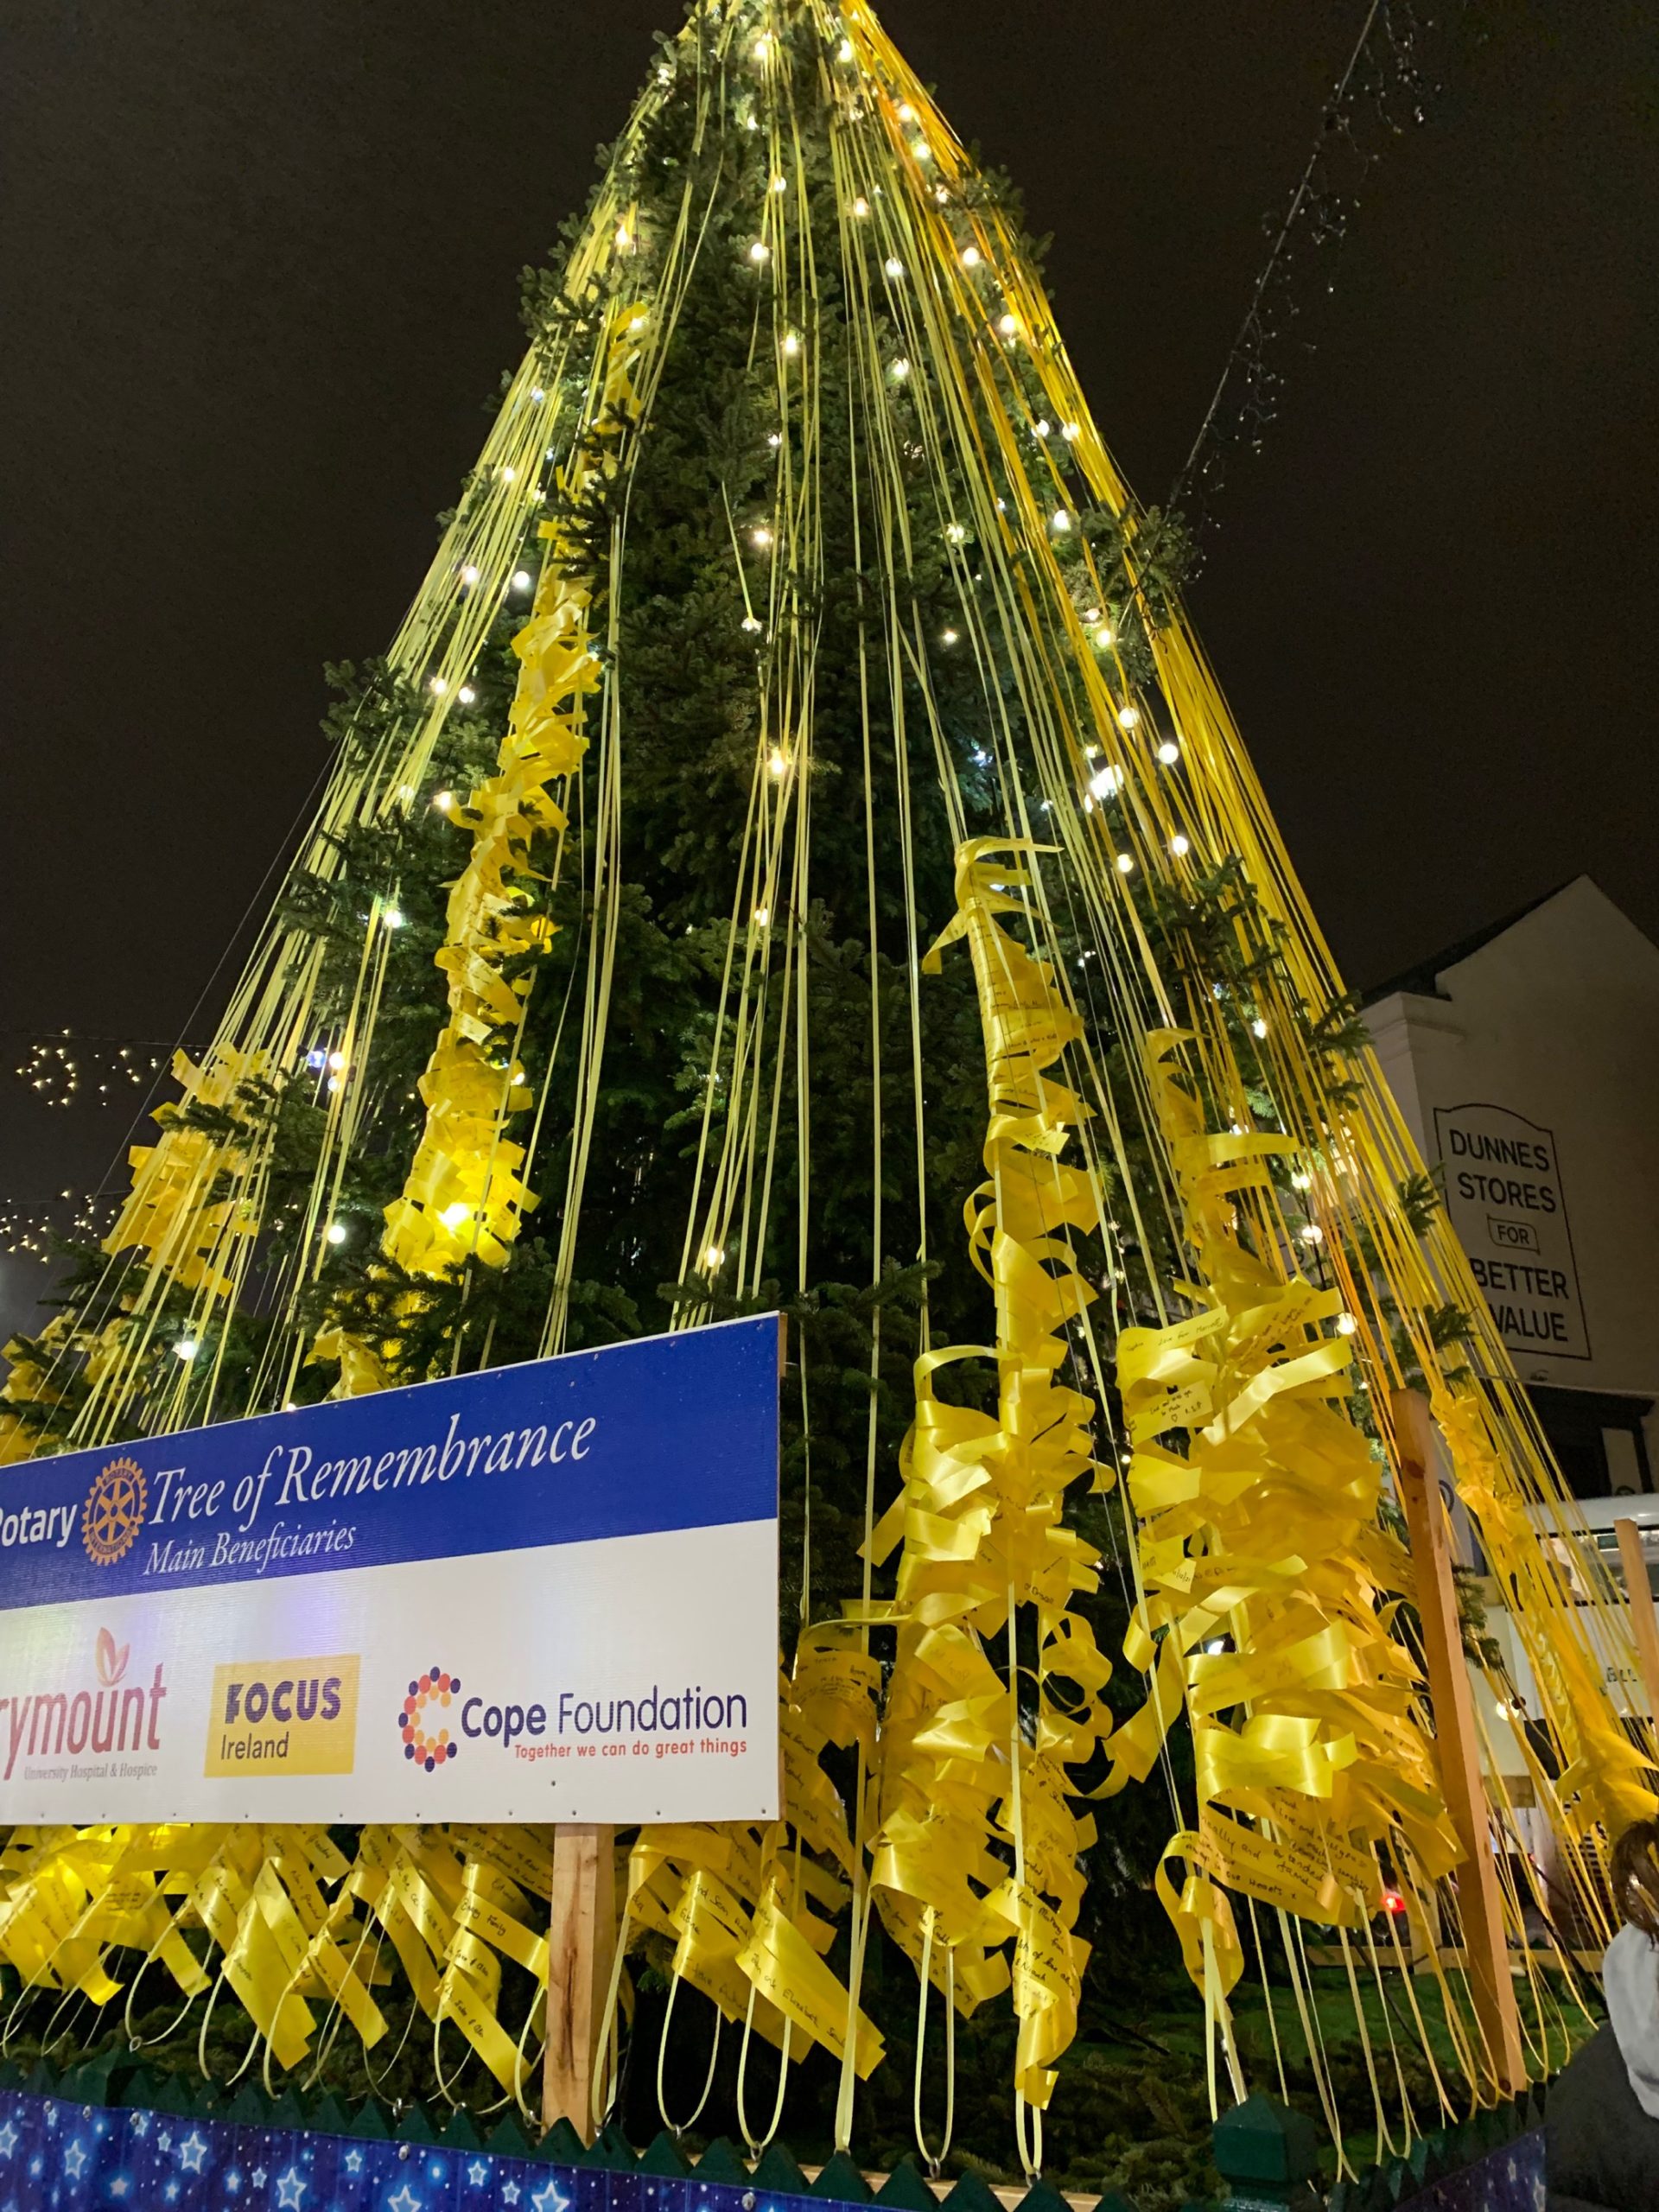 Rotary Tree of Remembrance Focus Ireland